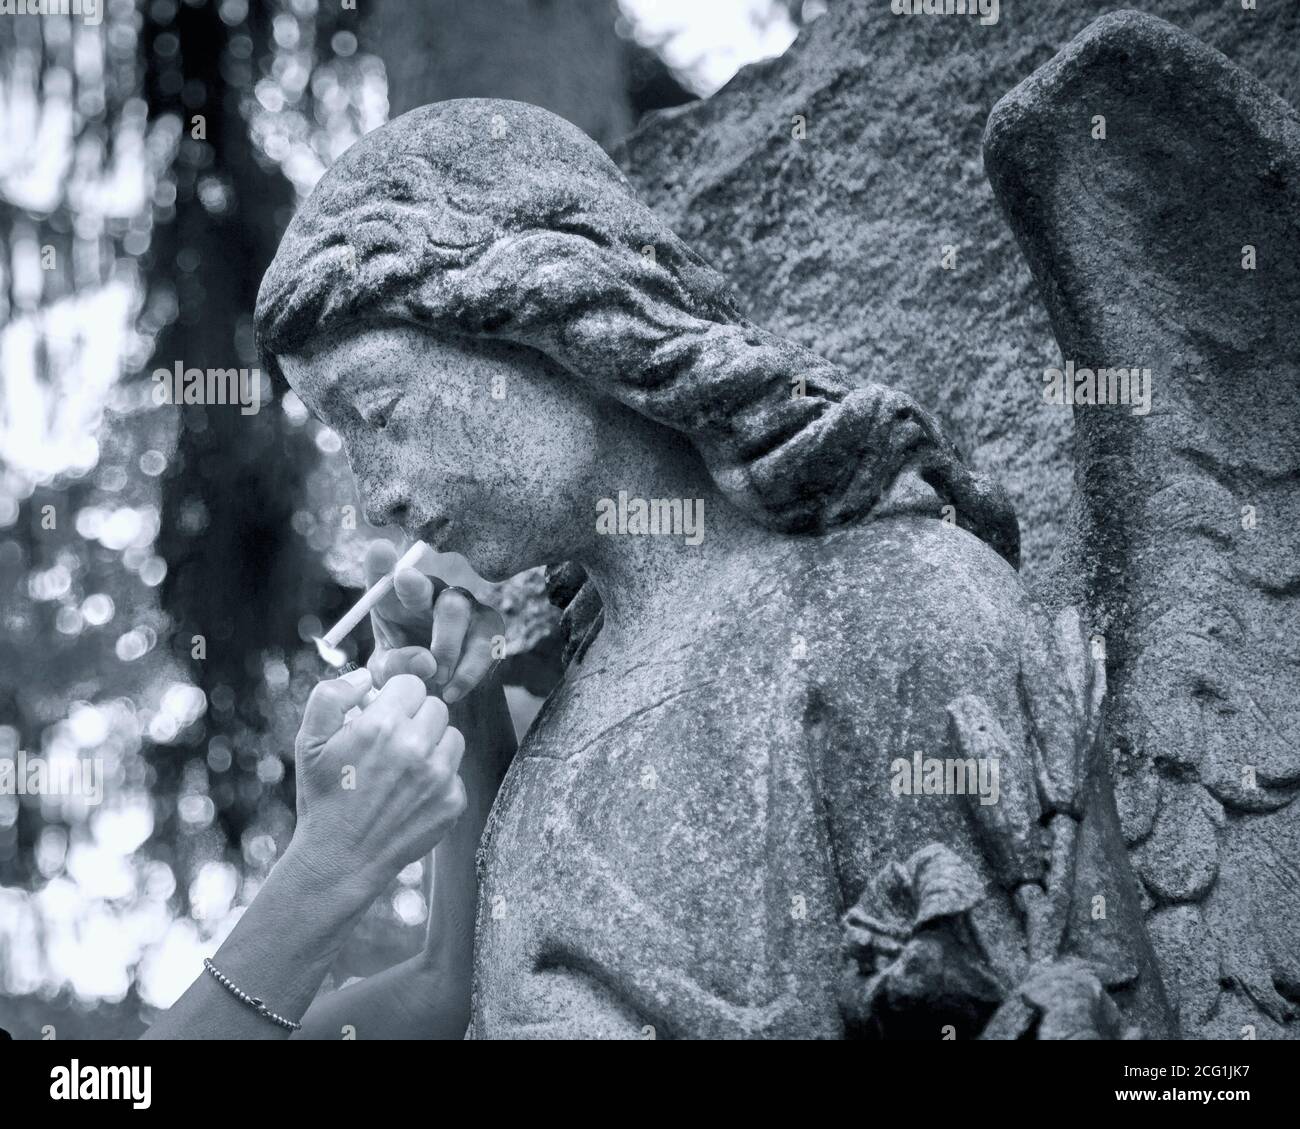 A close-up view of a woman lighting a cigarette for a cemetery angel statue Stock Photo